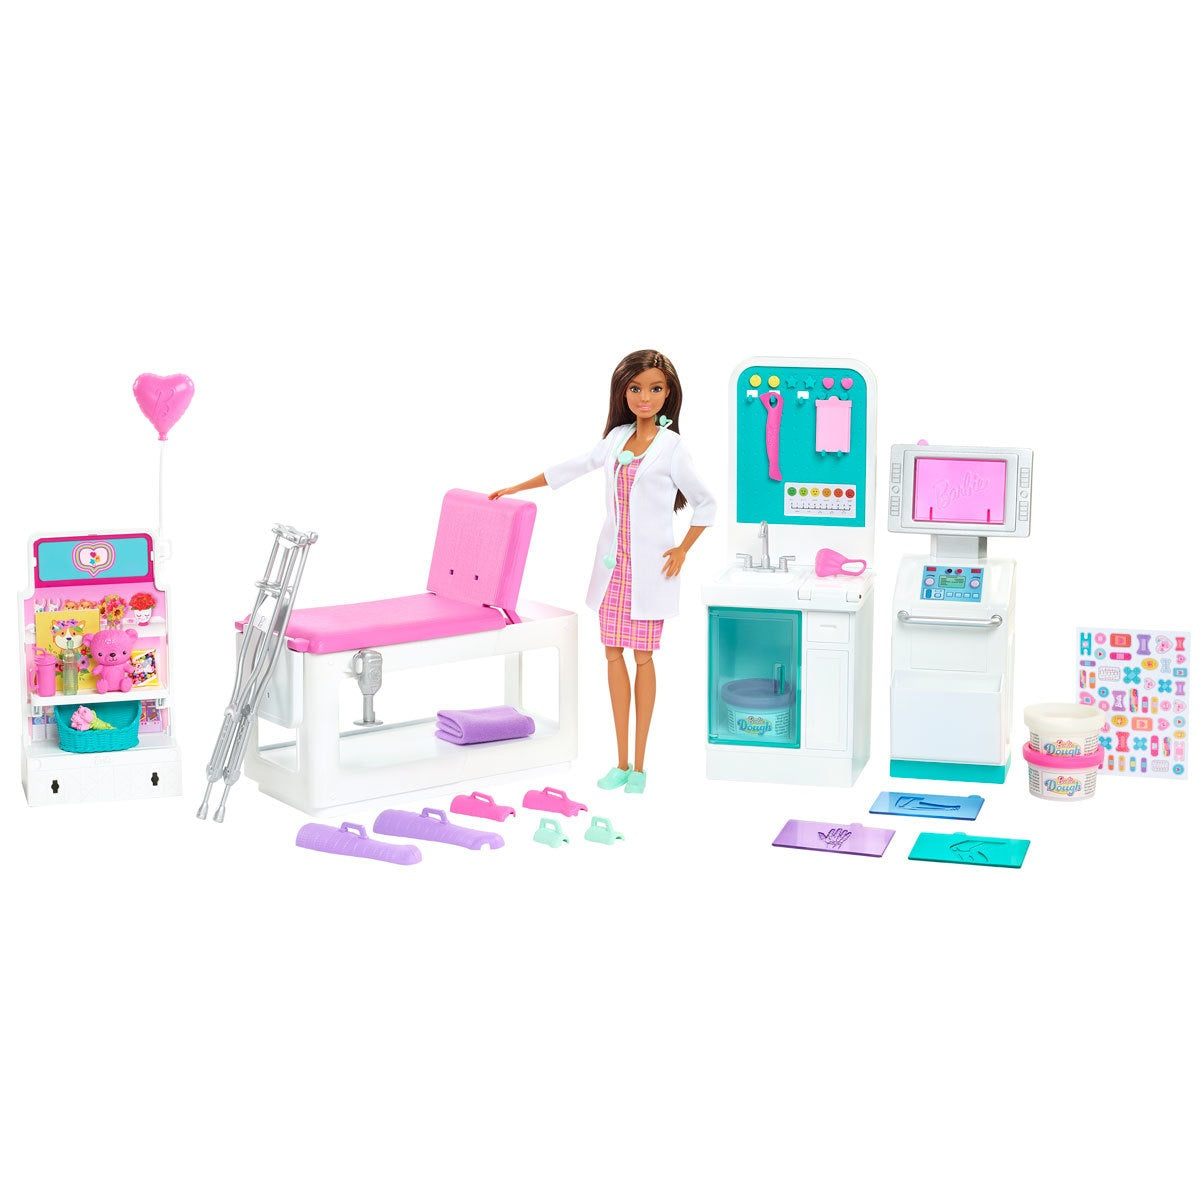 Barbie Fast Cast Clinic Playset and 30cm Doll